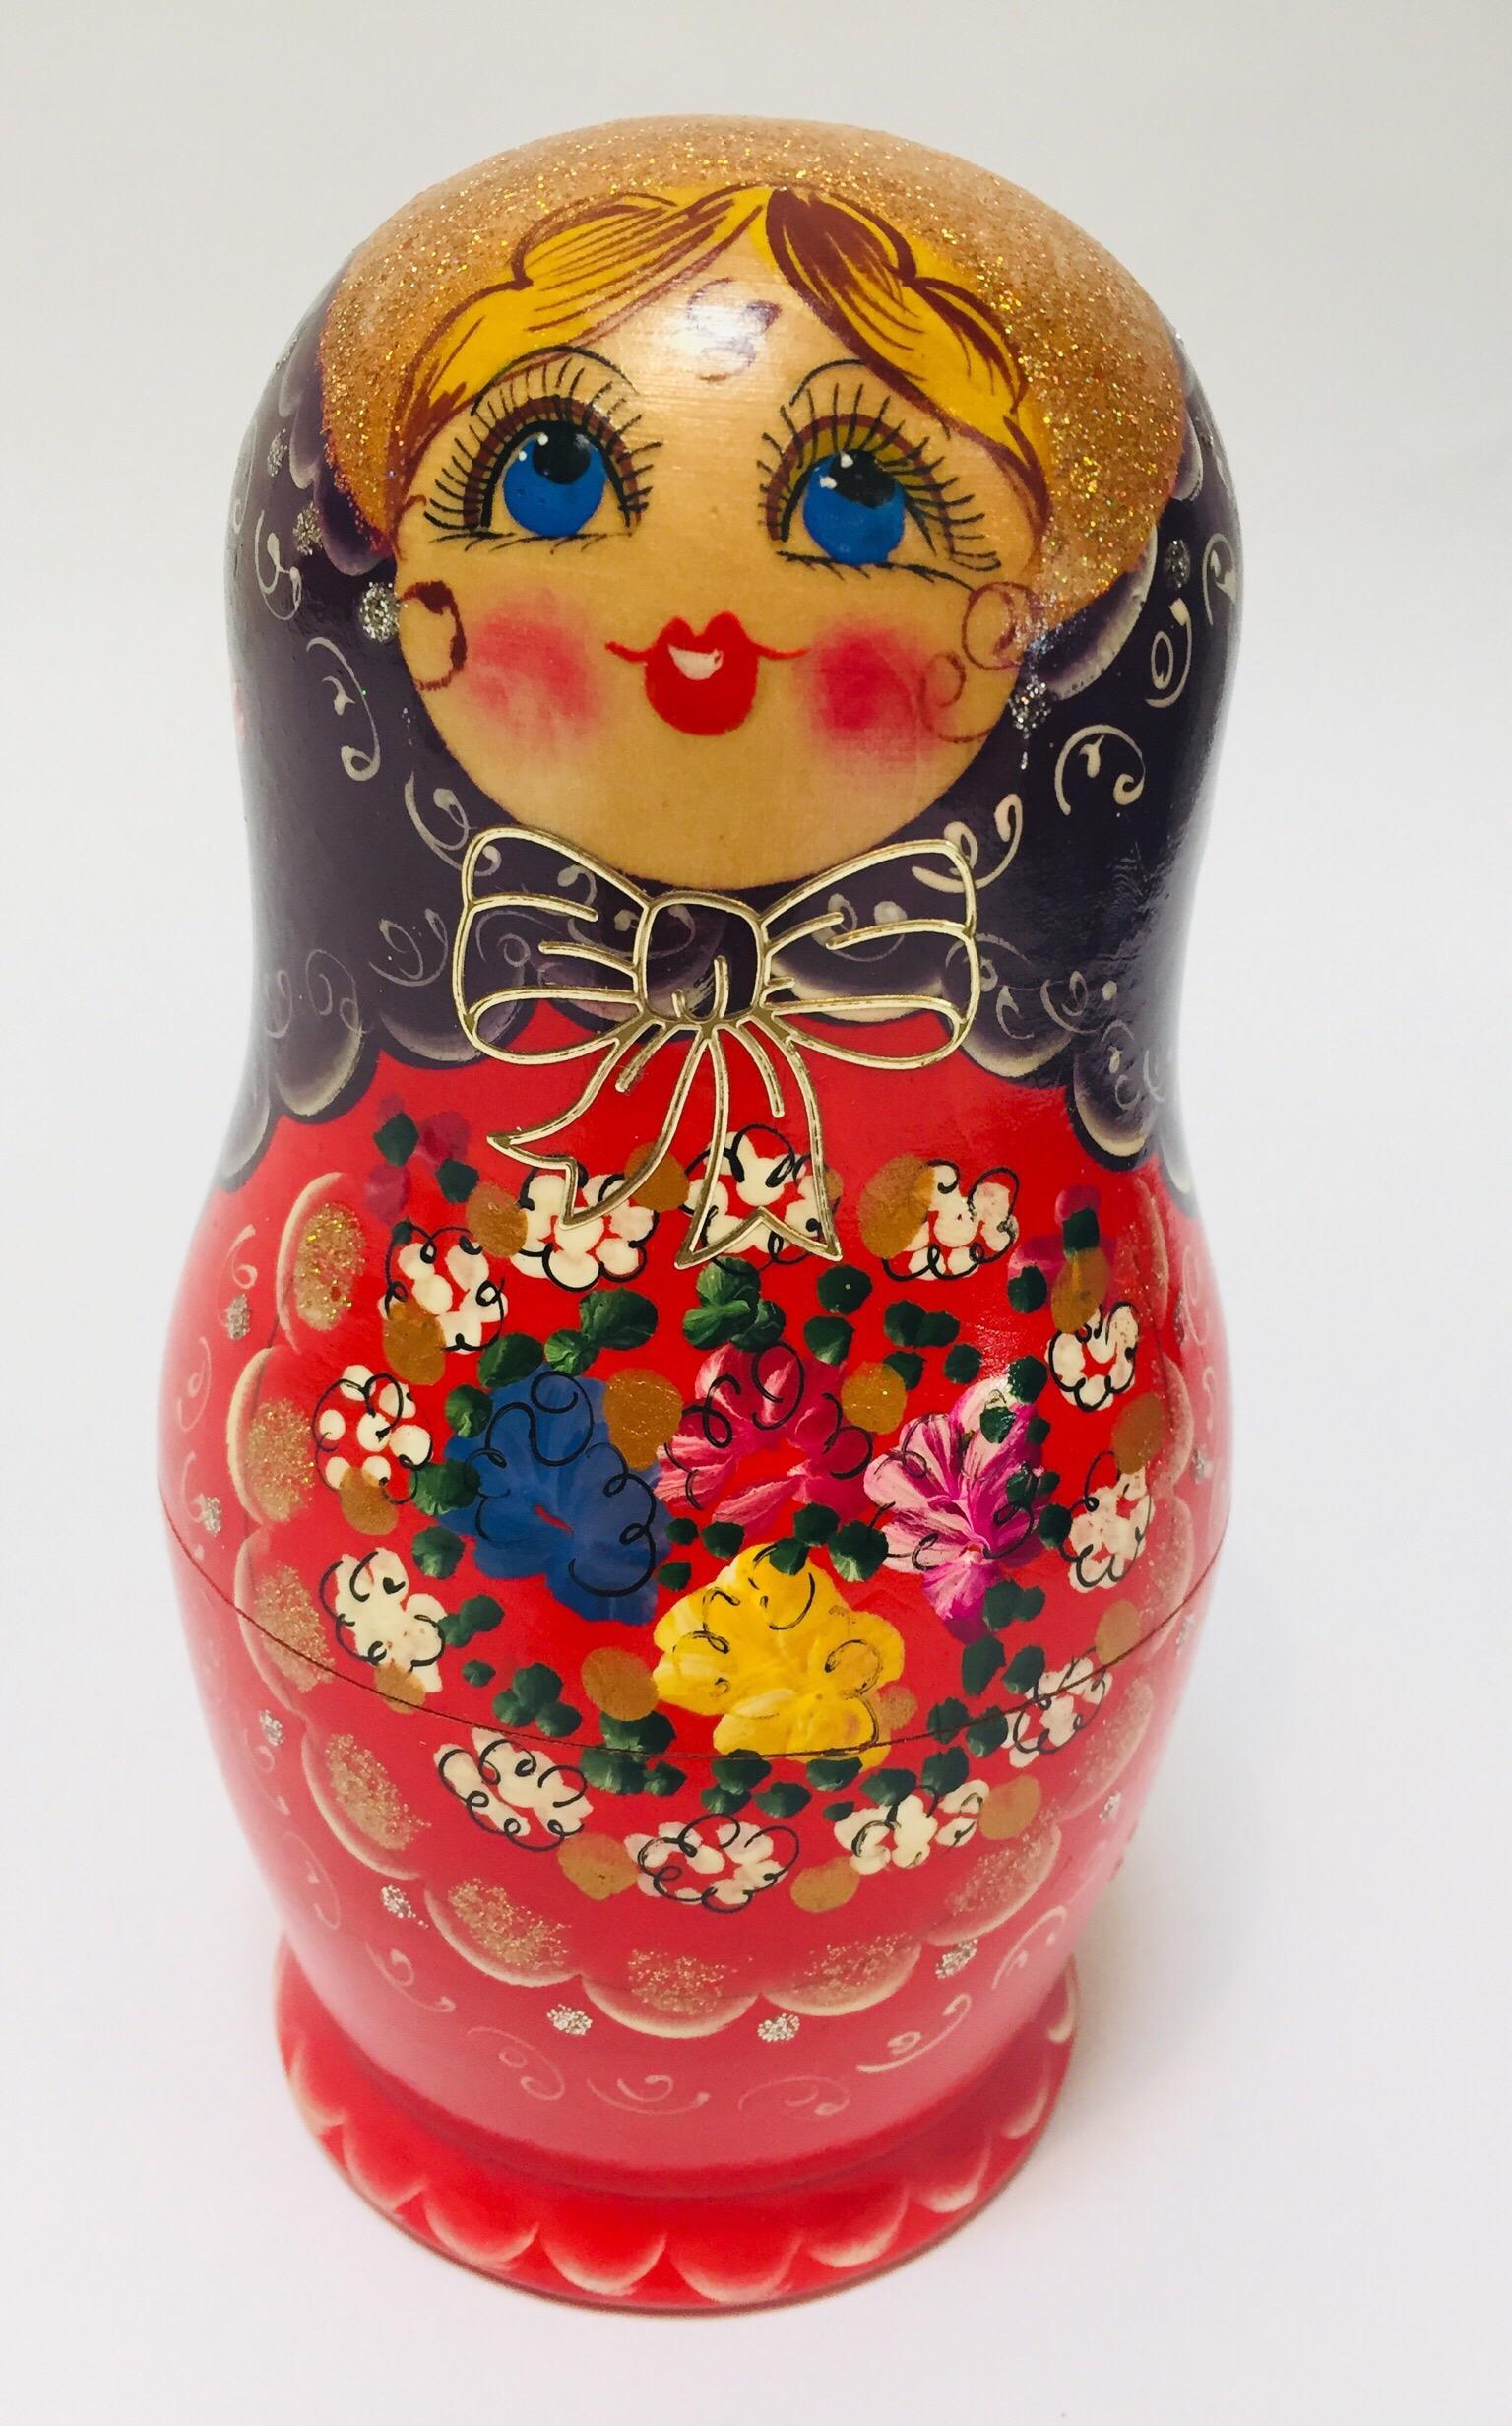 Details about   Russian Nesting Dolls Various Colors and Sizes Hand Painted Made in Russia